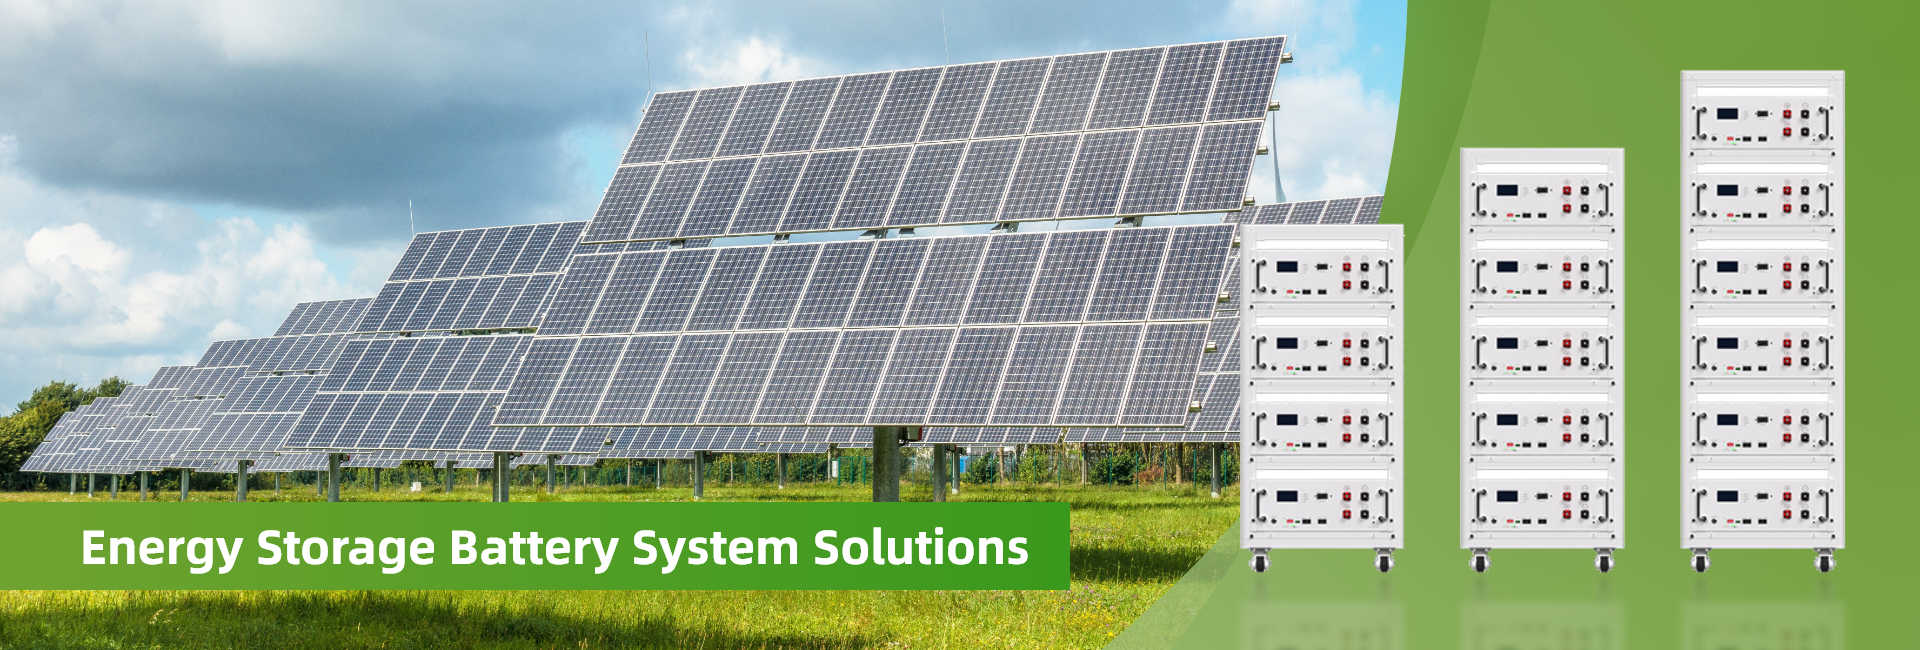 Energy Storage Battery System Solutions